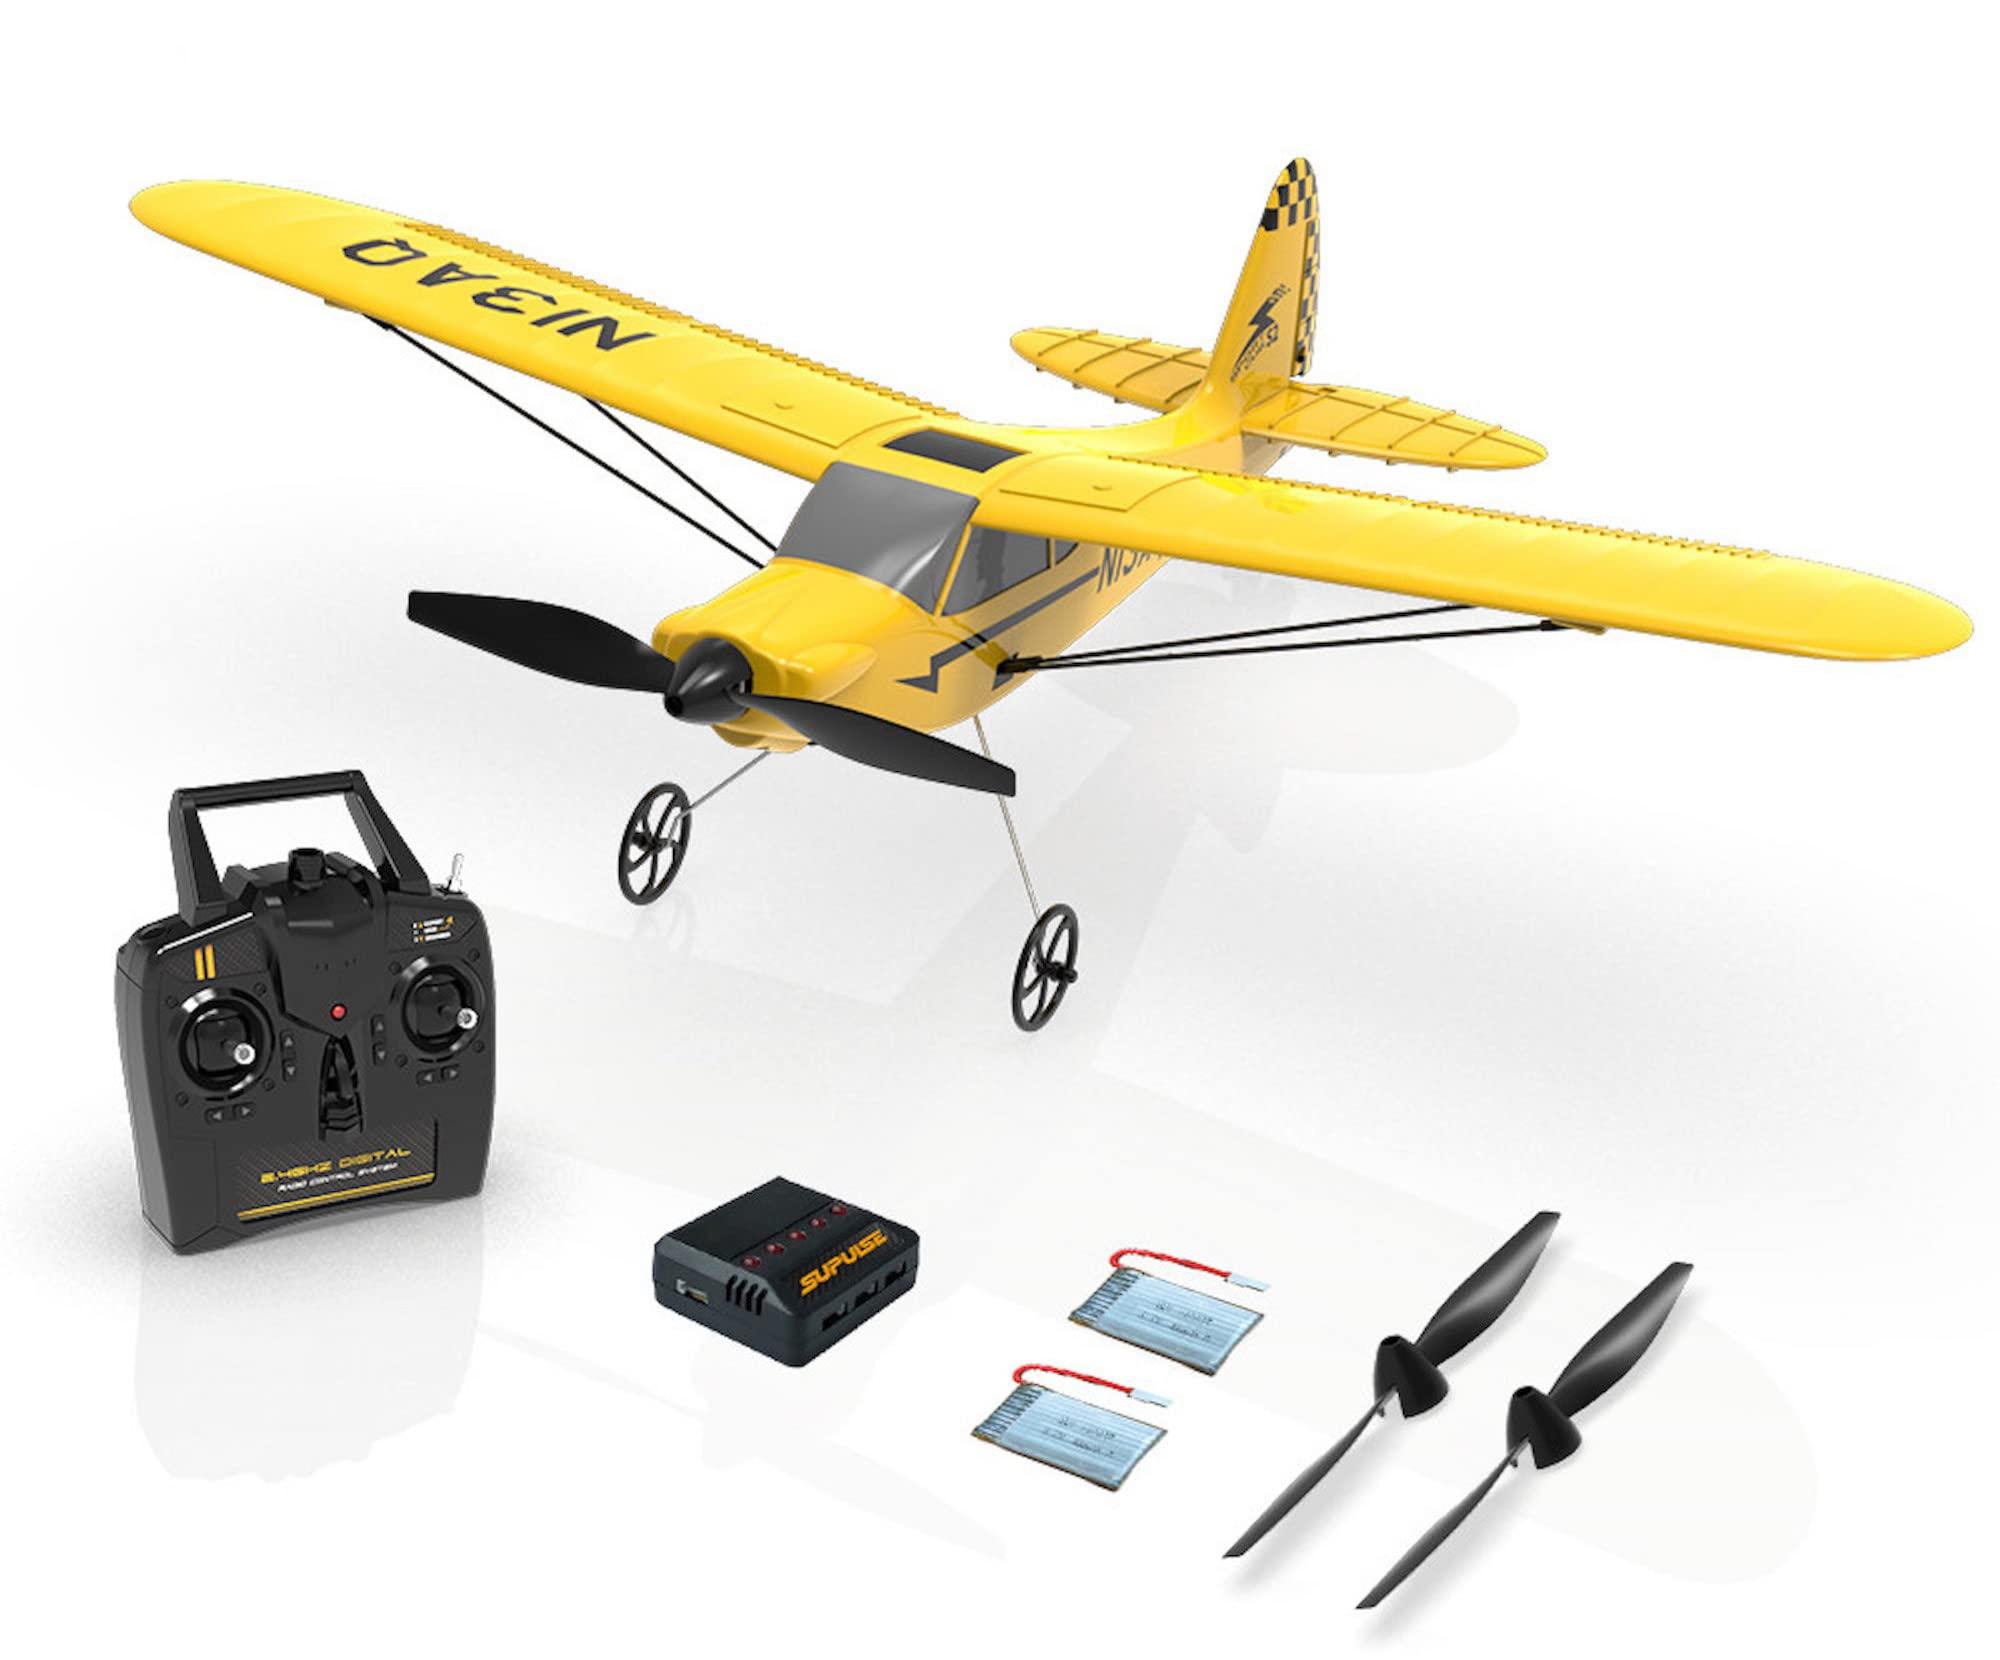 Rc Planes For Sale Near Me: Tips for Finding the Perfect RC Plane